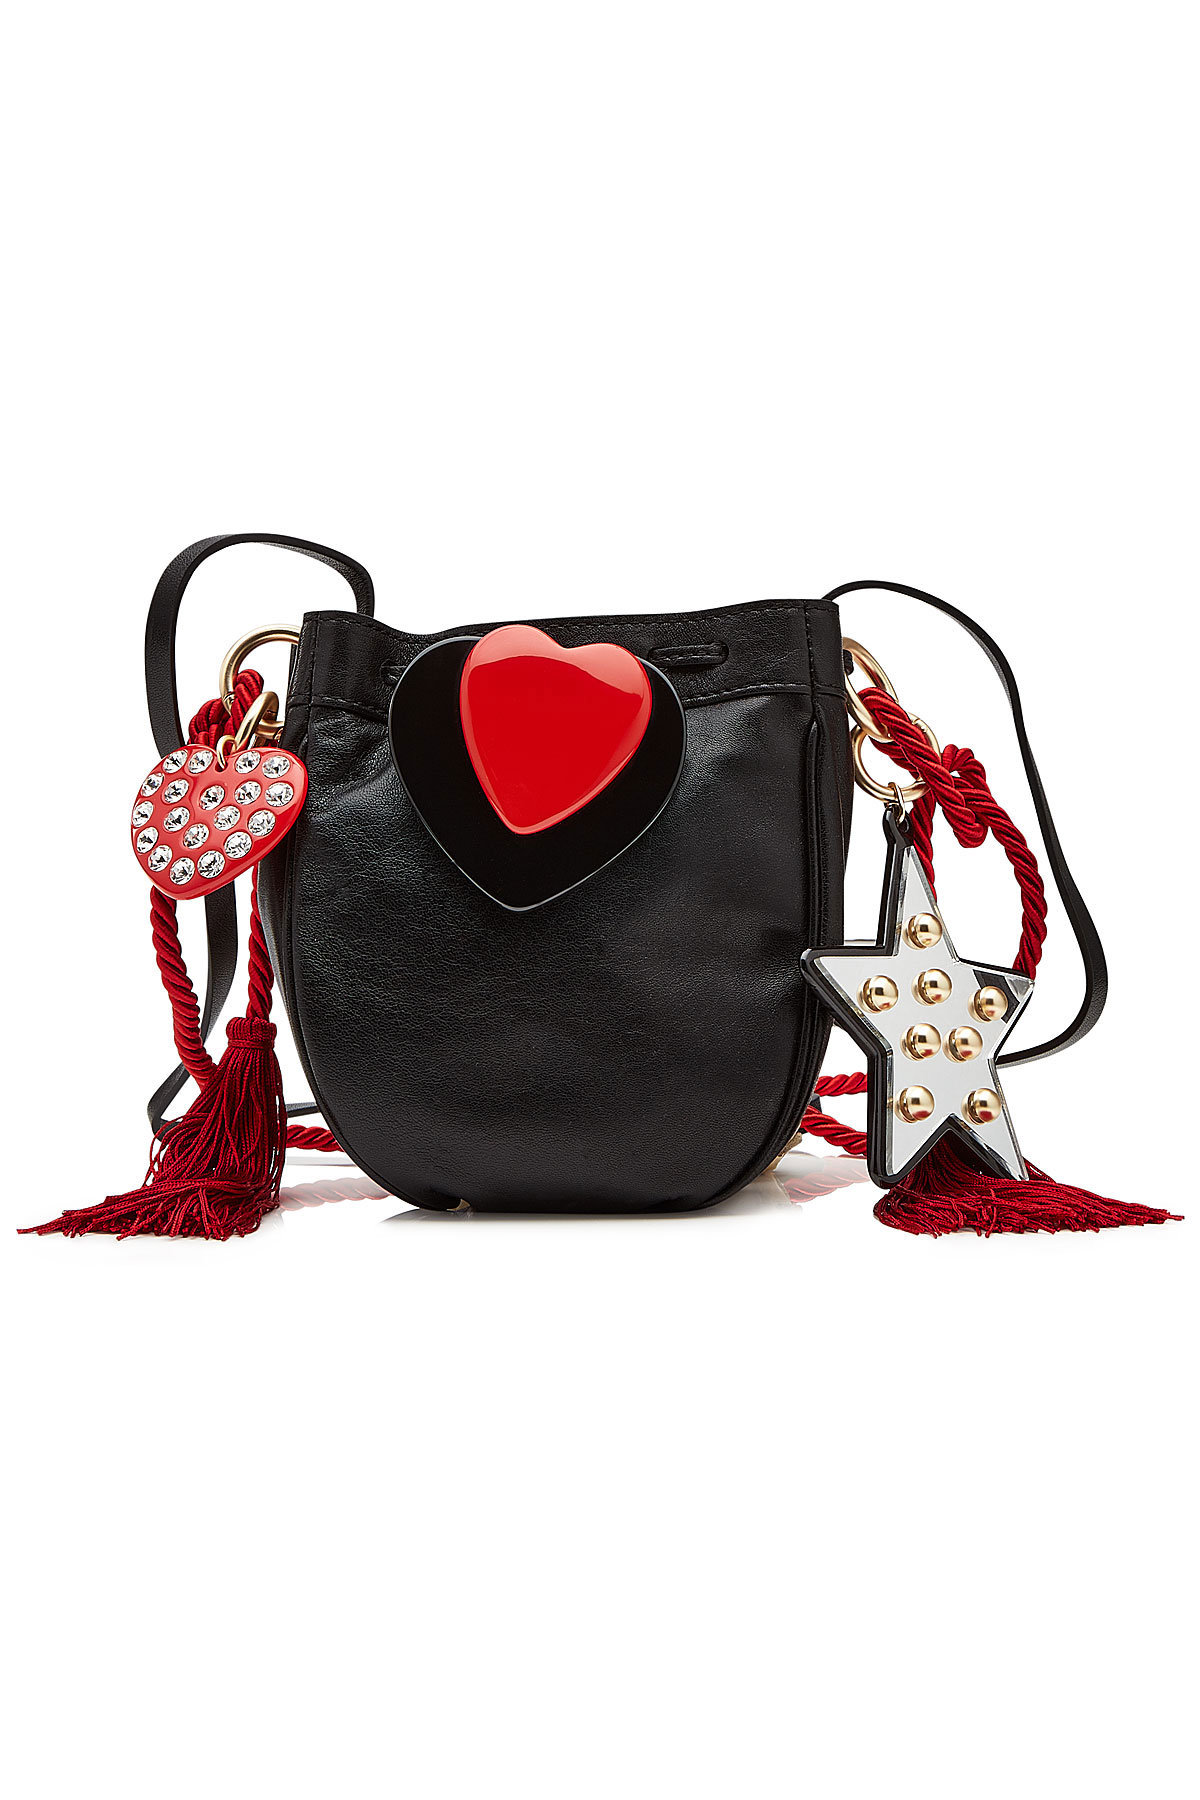 Philosophy di Lorenzo Serafini - Leather Shoulder Bag with Charms